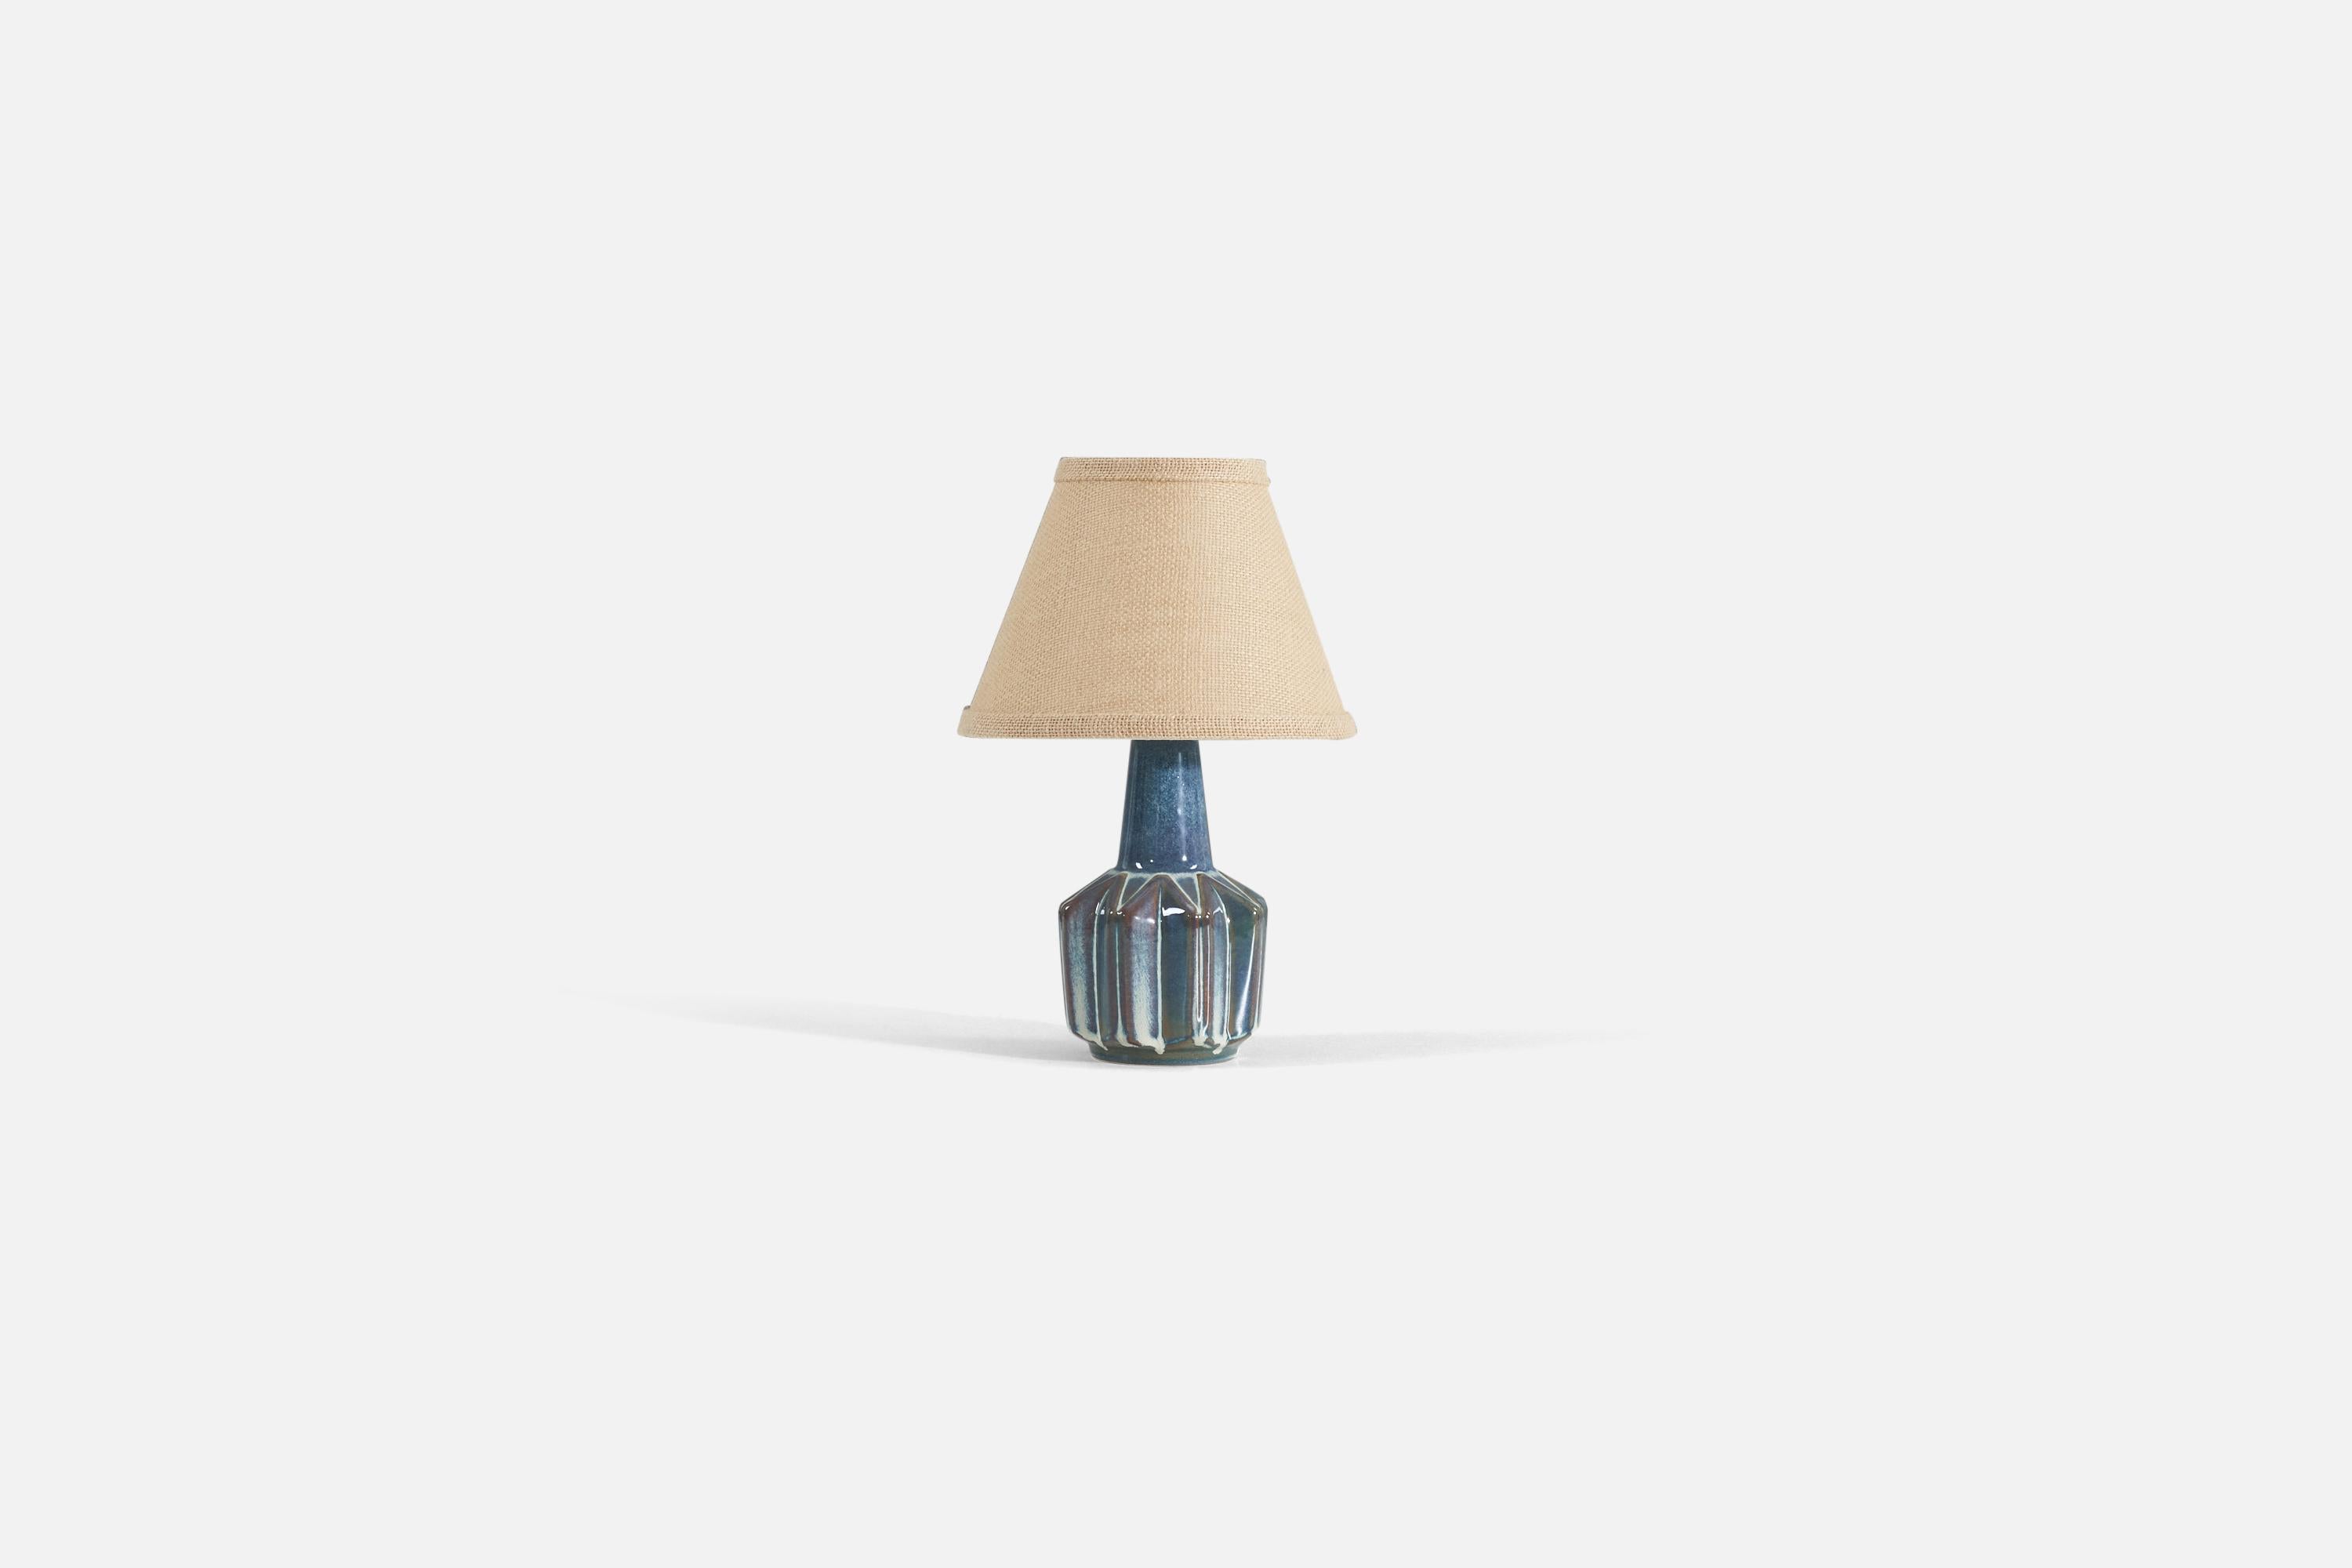 A blue-glazed stoneware table lamp produced by Søholm Stentøj, Denmark, 1960s.

Sold without lampshade. 

Measurements listed are of lamp.
Shade : 4.25 x 8.25 x 6
Lamp with shade : 12.5 x 8.25 x 8.25.